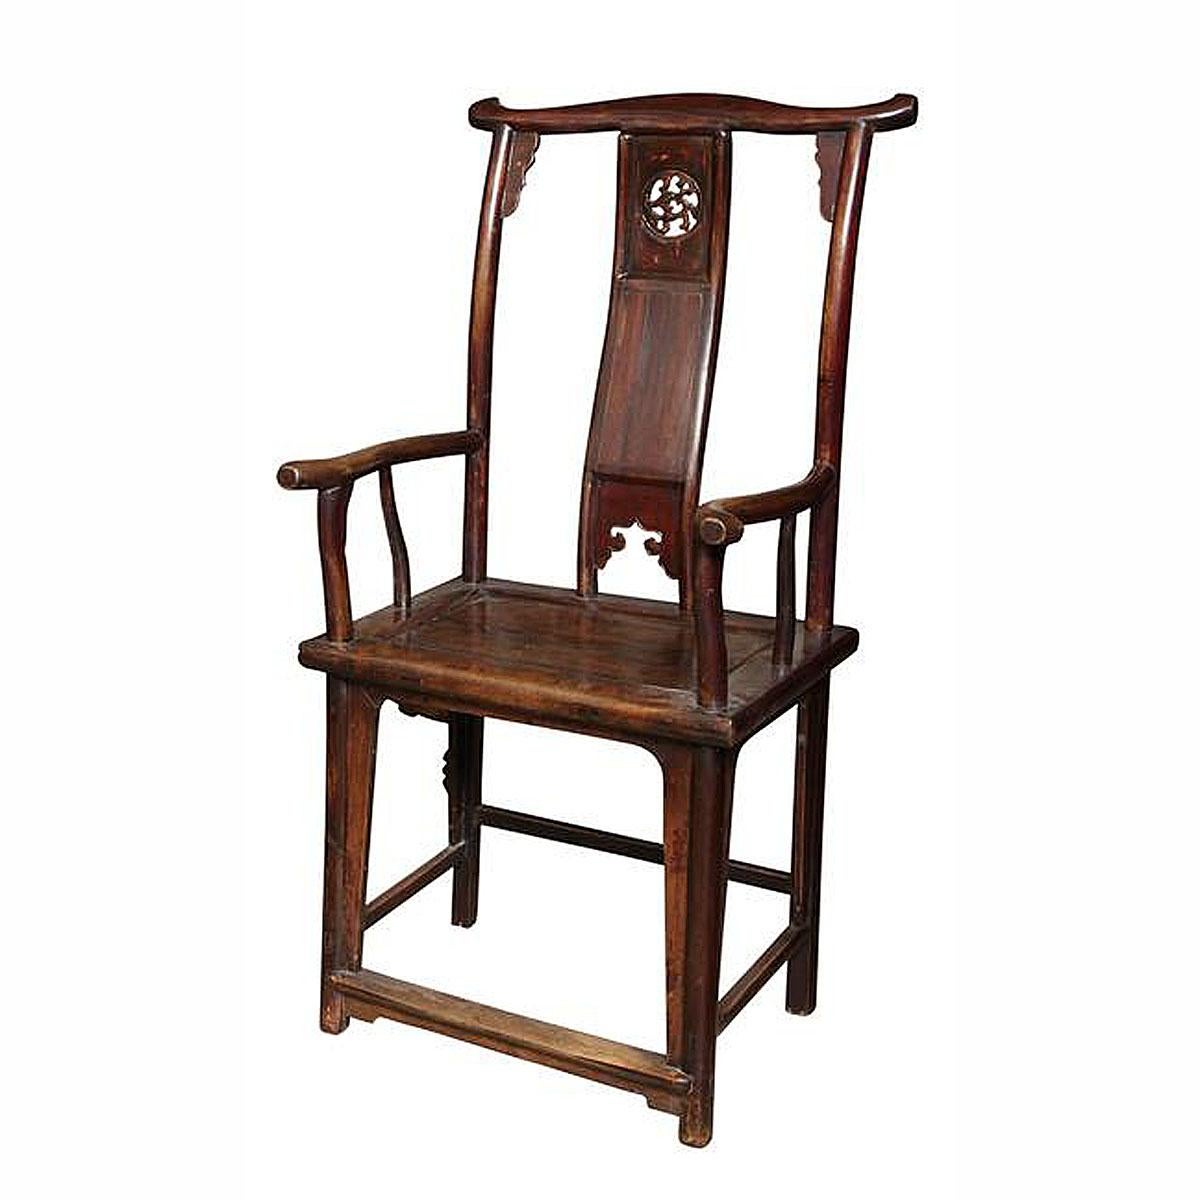 A classic Minister's hat armchair from Henan, China. Northern elm wood, original finish, circa 1890. Open hand-carving of 